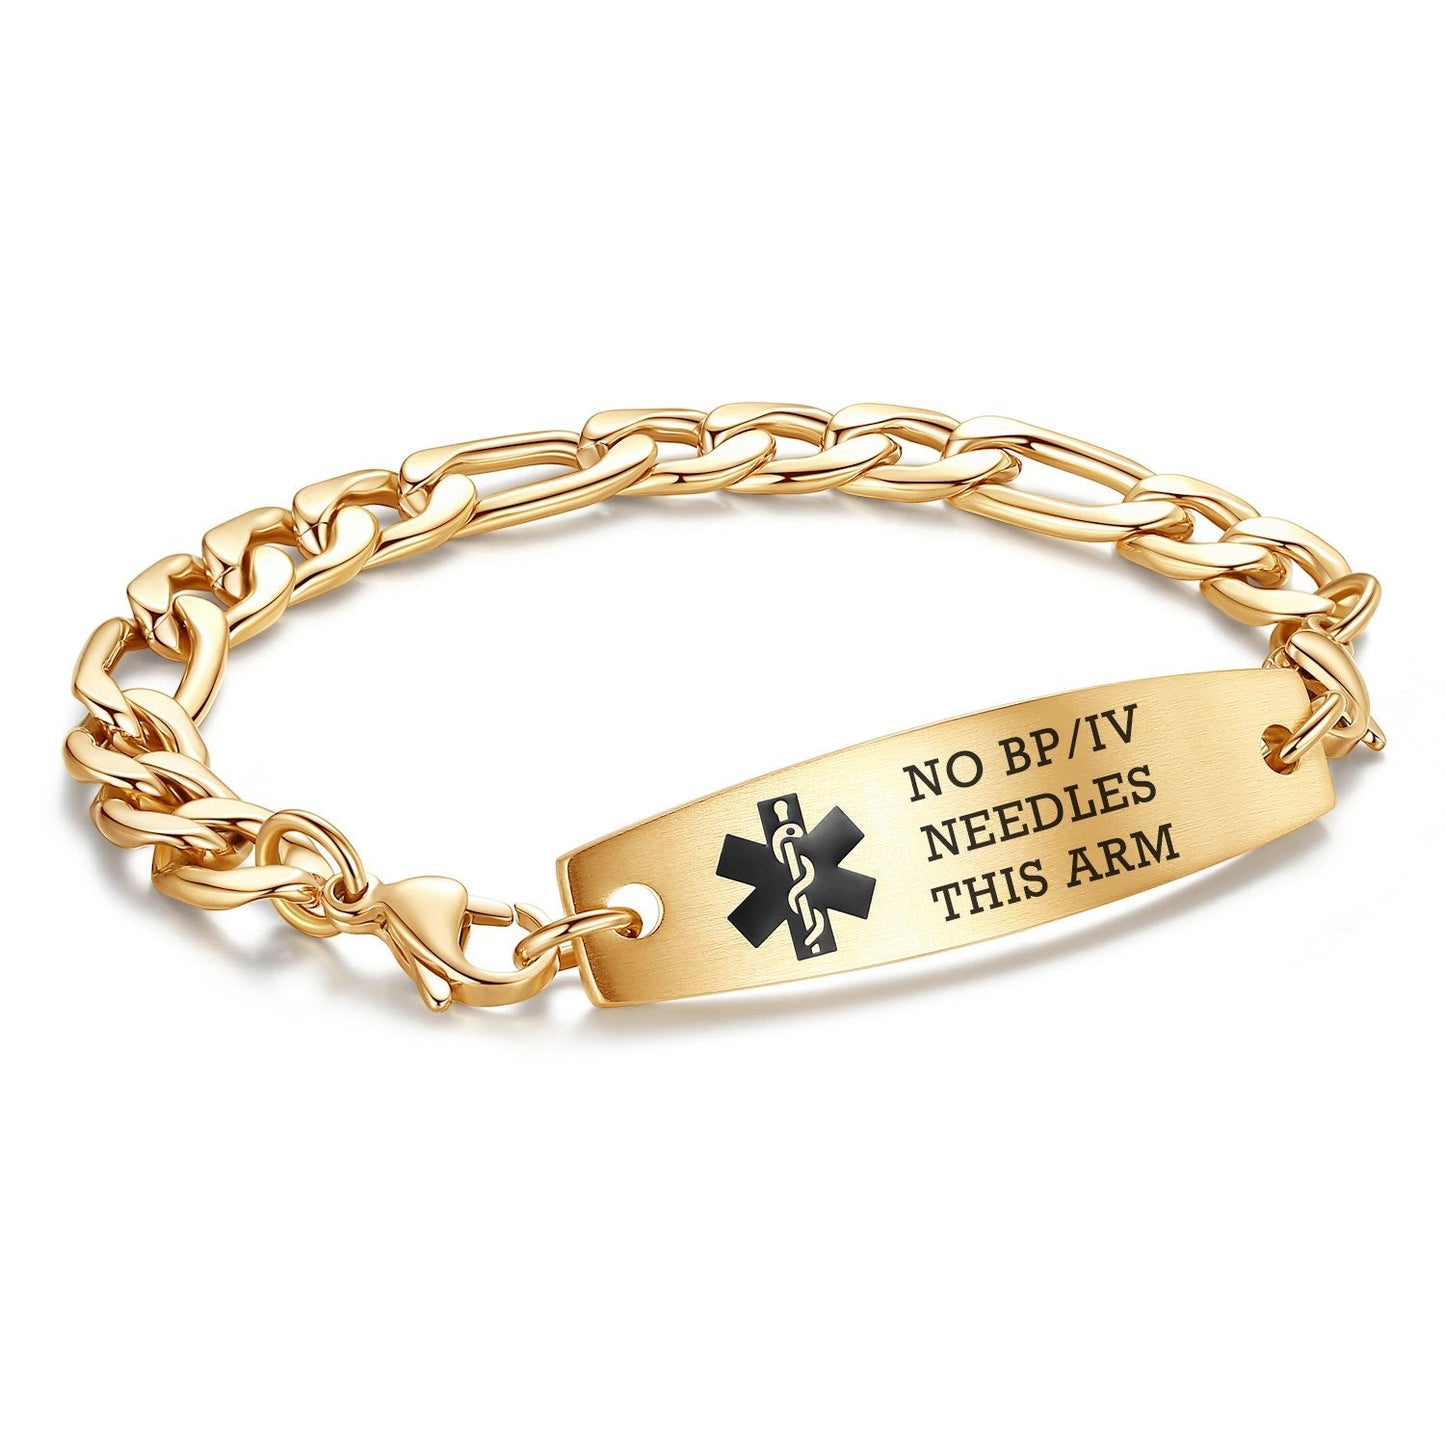 Engraving NO BP/IV/NEEDLES THIS ARM Gold Figaro Chain Interchangeable Medical id Bracelets